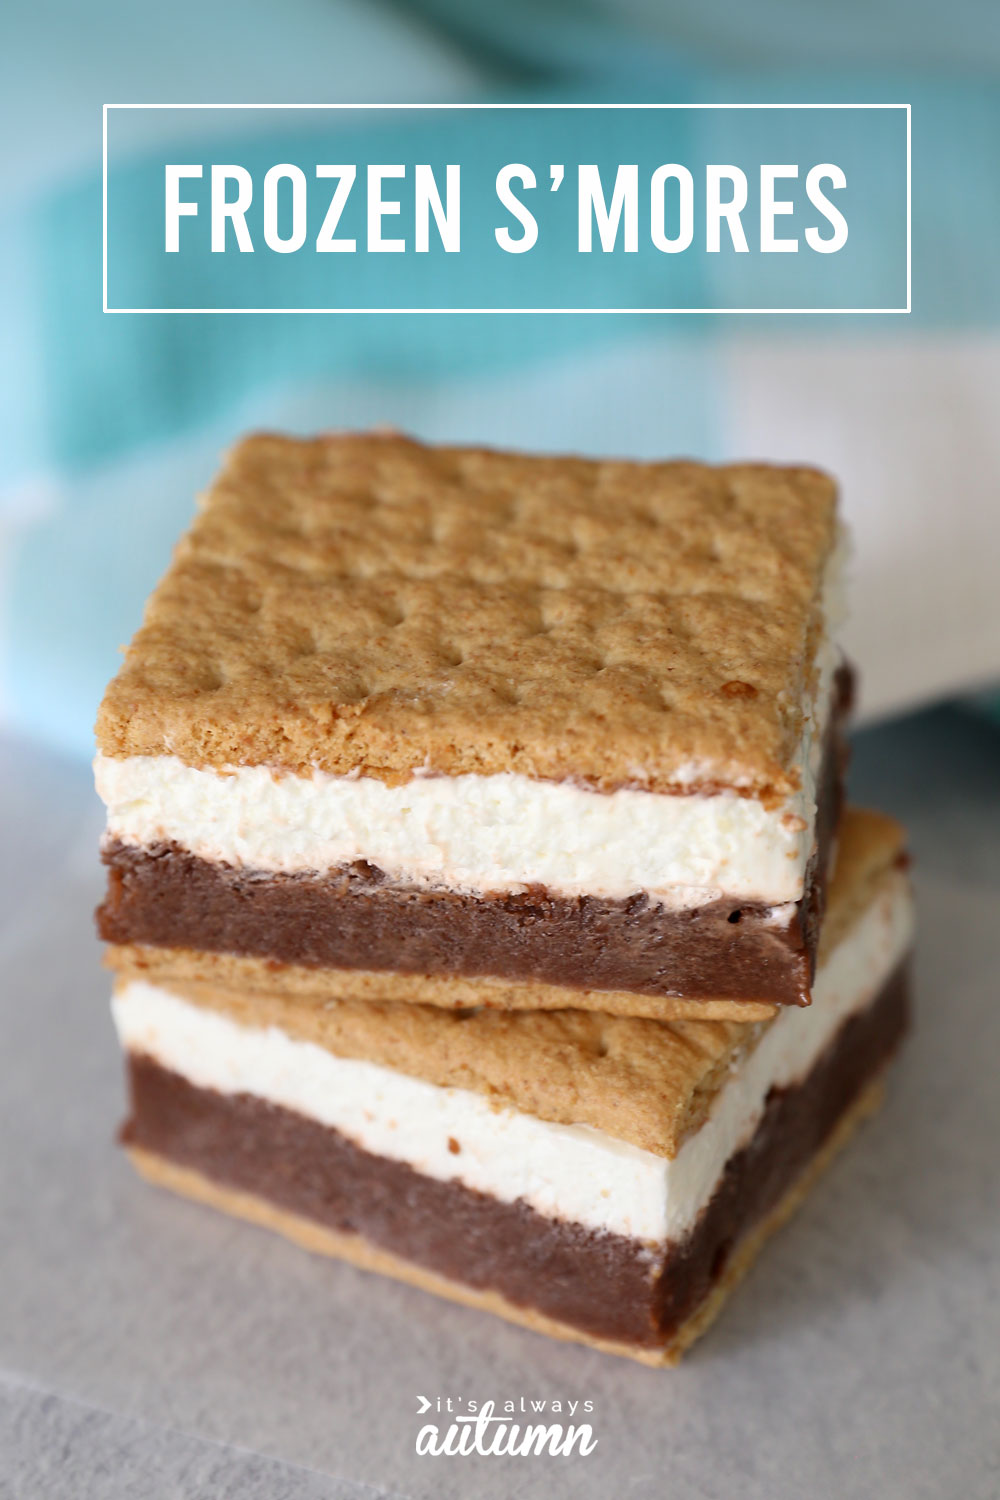 Frozen s'mores are a great way to enjoy all the flavor of s'mores in a cold treat! Keep them in your freezer so you can enjoy them anytime.